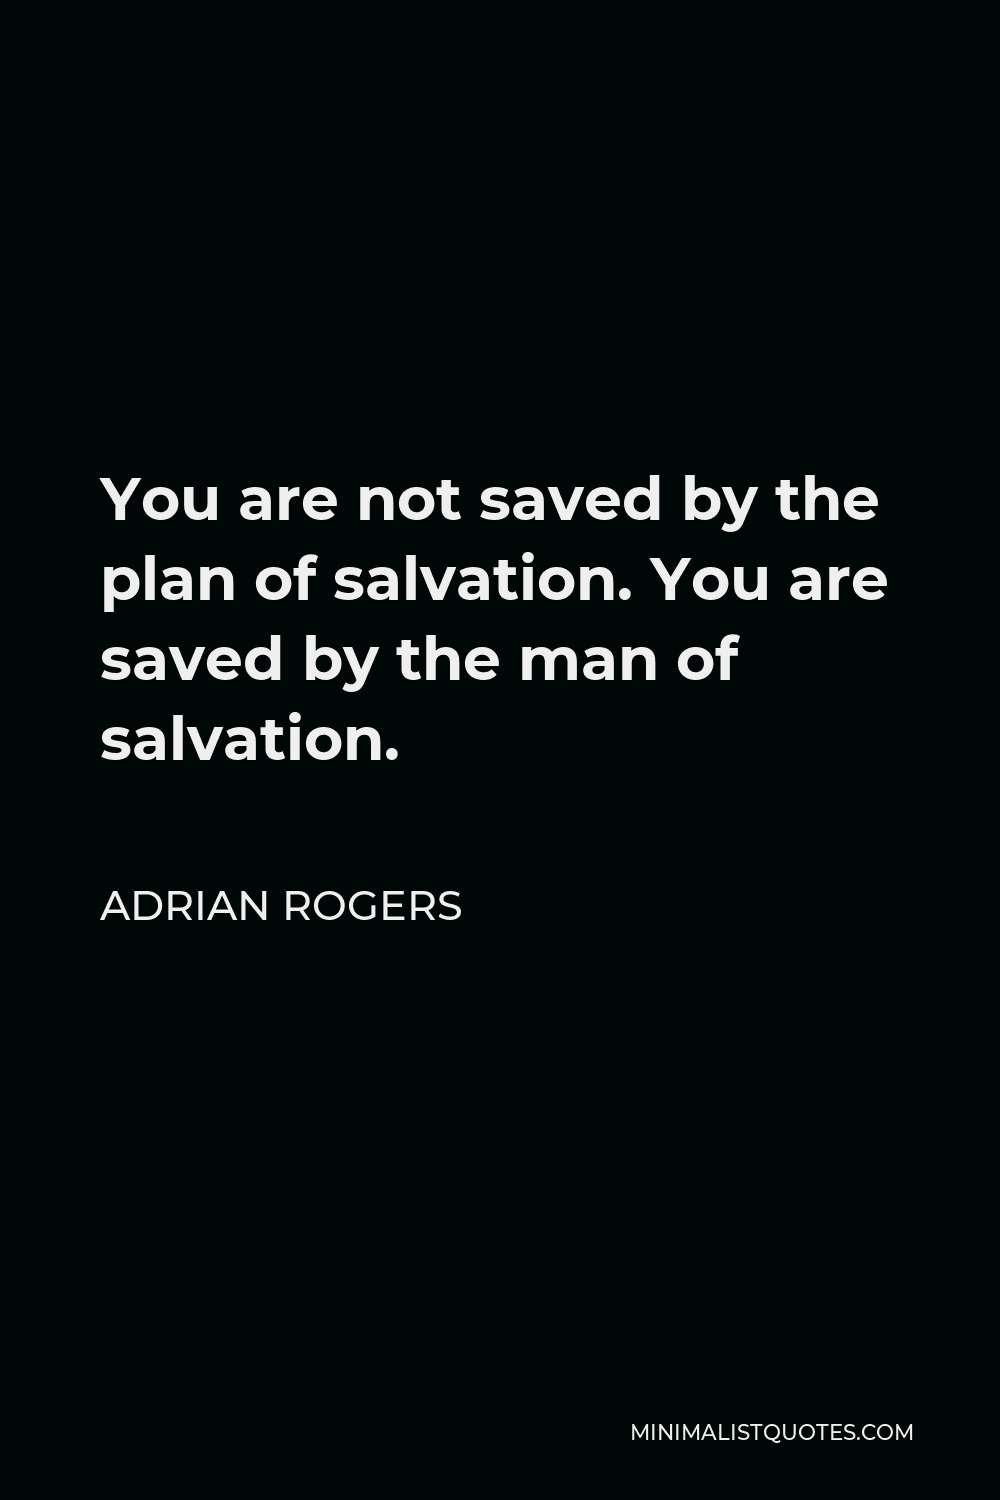 Adrian Rogers Quote - You are not saved by the plan of salvation. You are saved by the man of salvation.